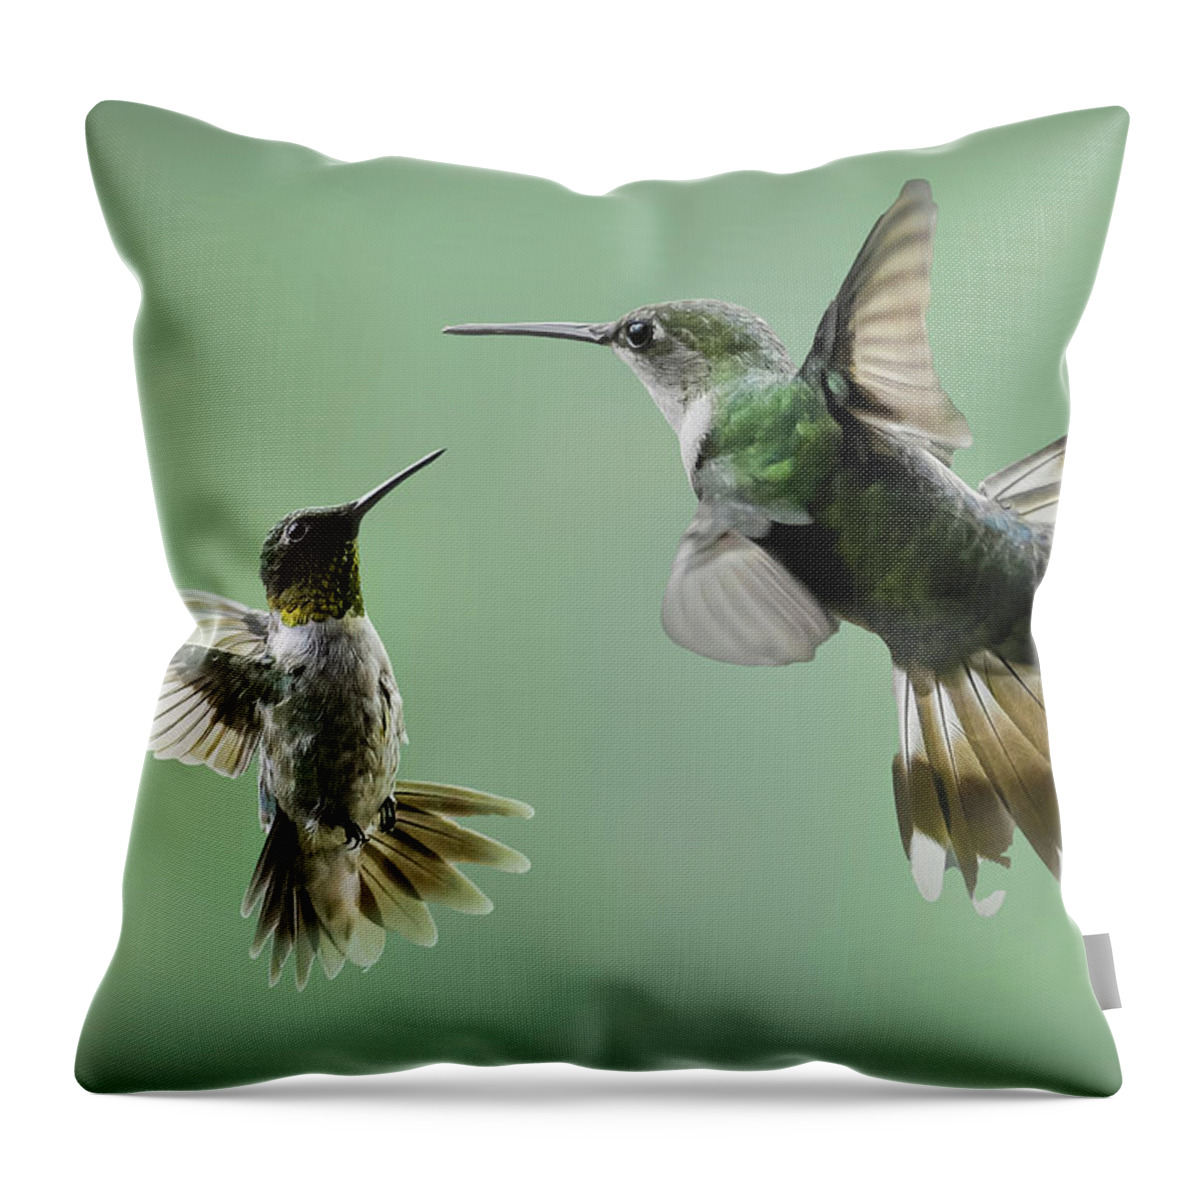 Ruby Throated Hummingbird In Flight Throw Pillow featuring the photograph The Ruby Throated Hummingbird In Flight #1 by Sandra J's